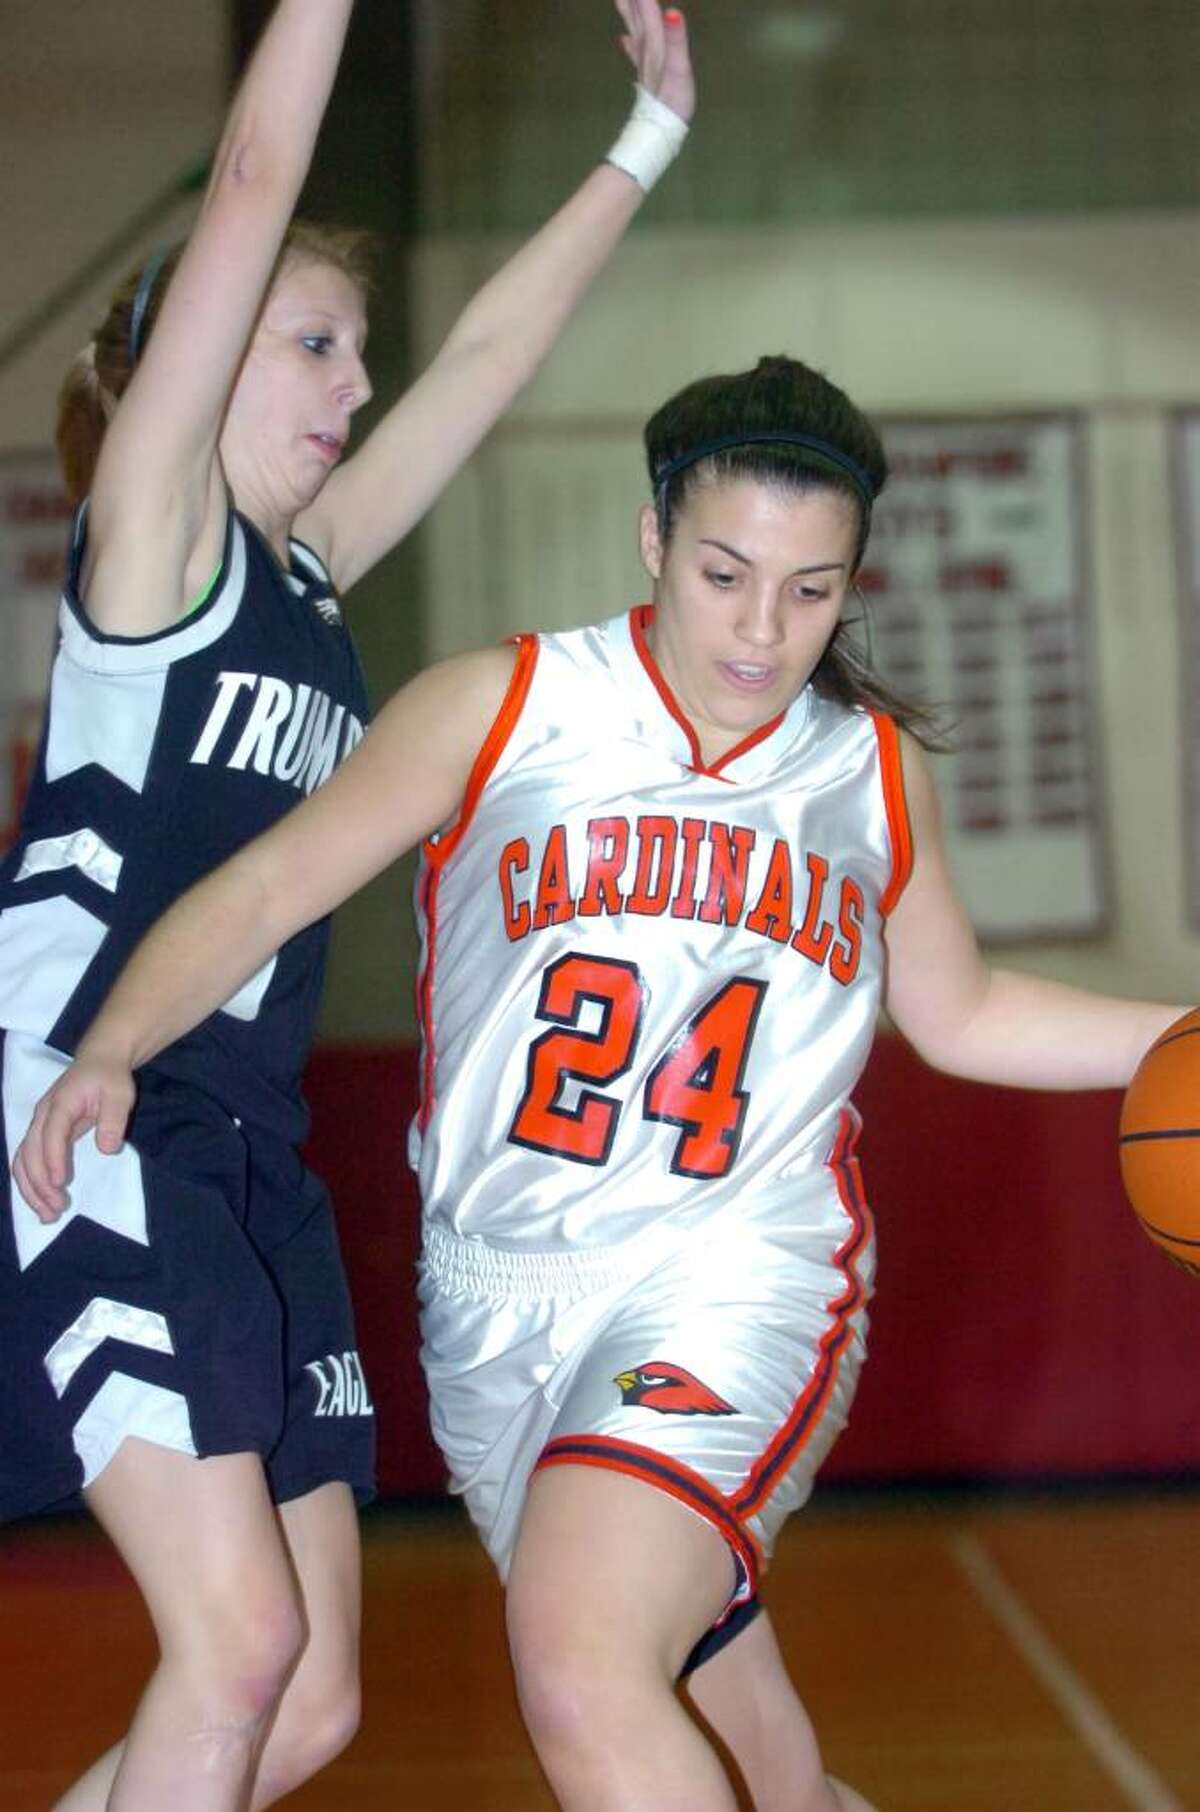 Greenwich basketball captain Jessica Fiscella pushes past Trumbull's Alli Kirby as Greenwich High School hosts Trumbull in a girls basketball game Tuesday evening, January 5, 2010. Trumbull won the game, 51-30.